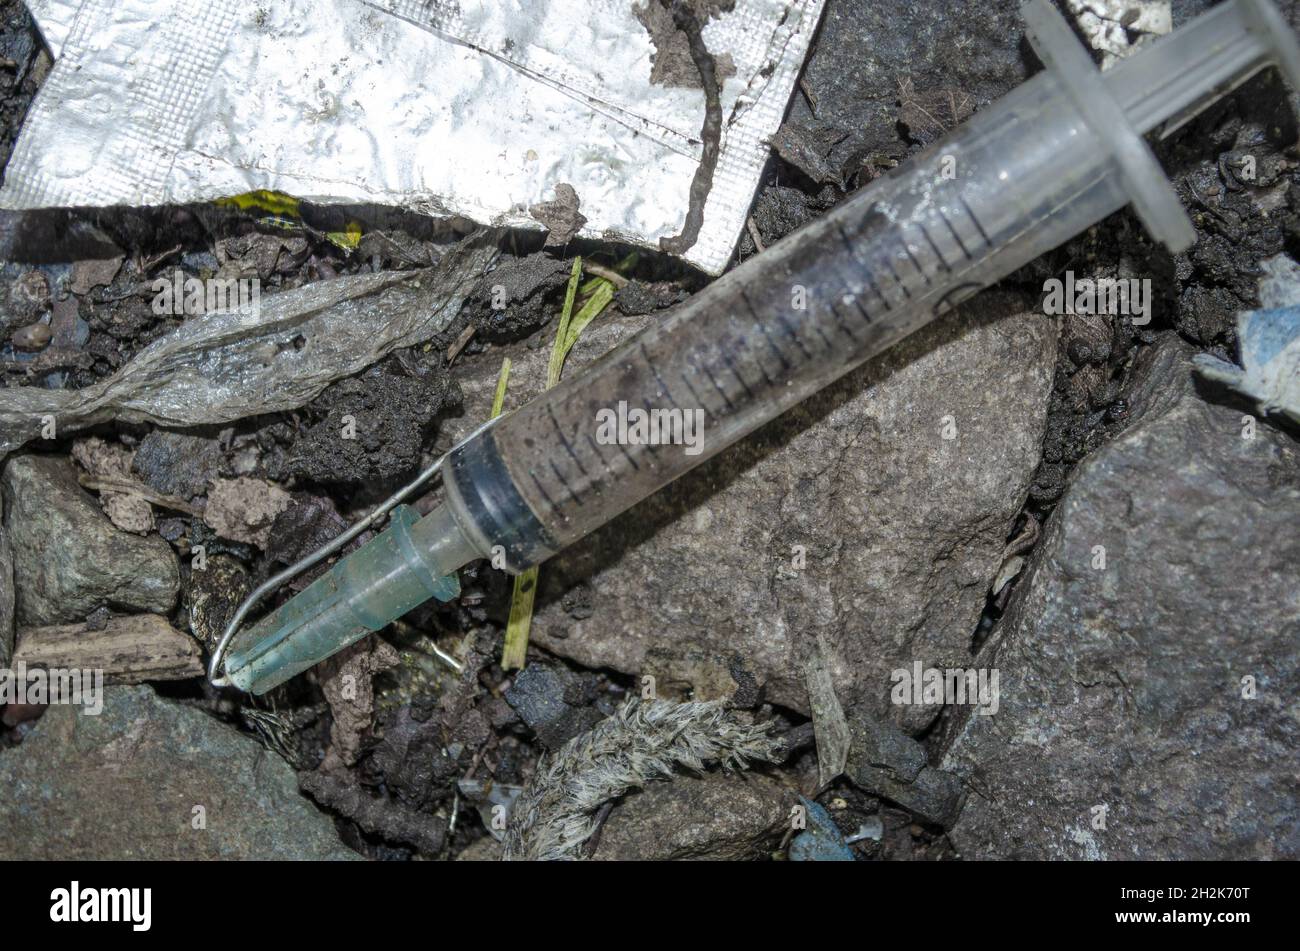 Closeup shot of a drug user's syringe and tackle on waste ground in the inner-city area. Stock Photo